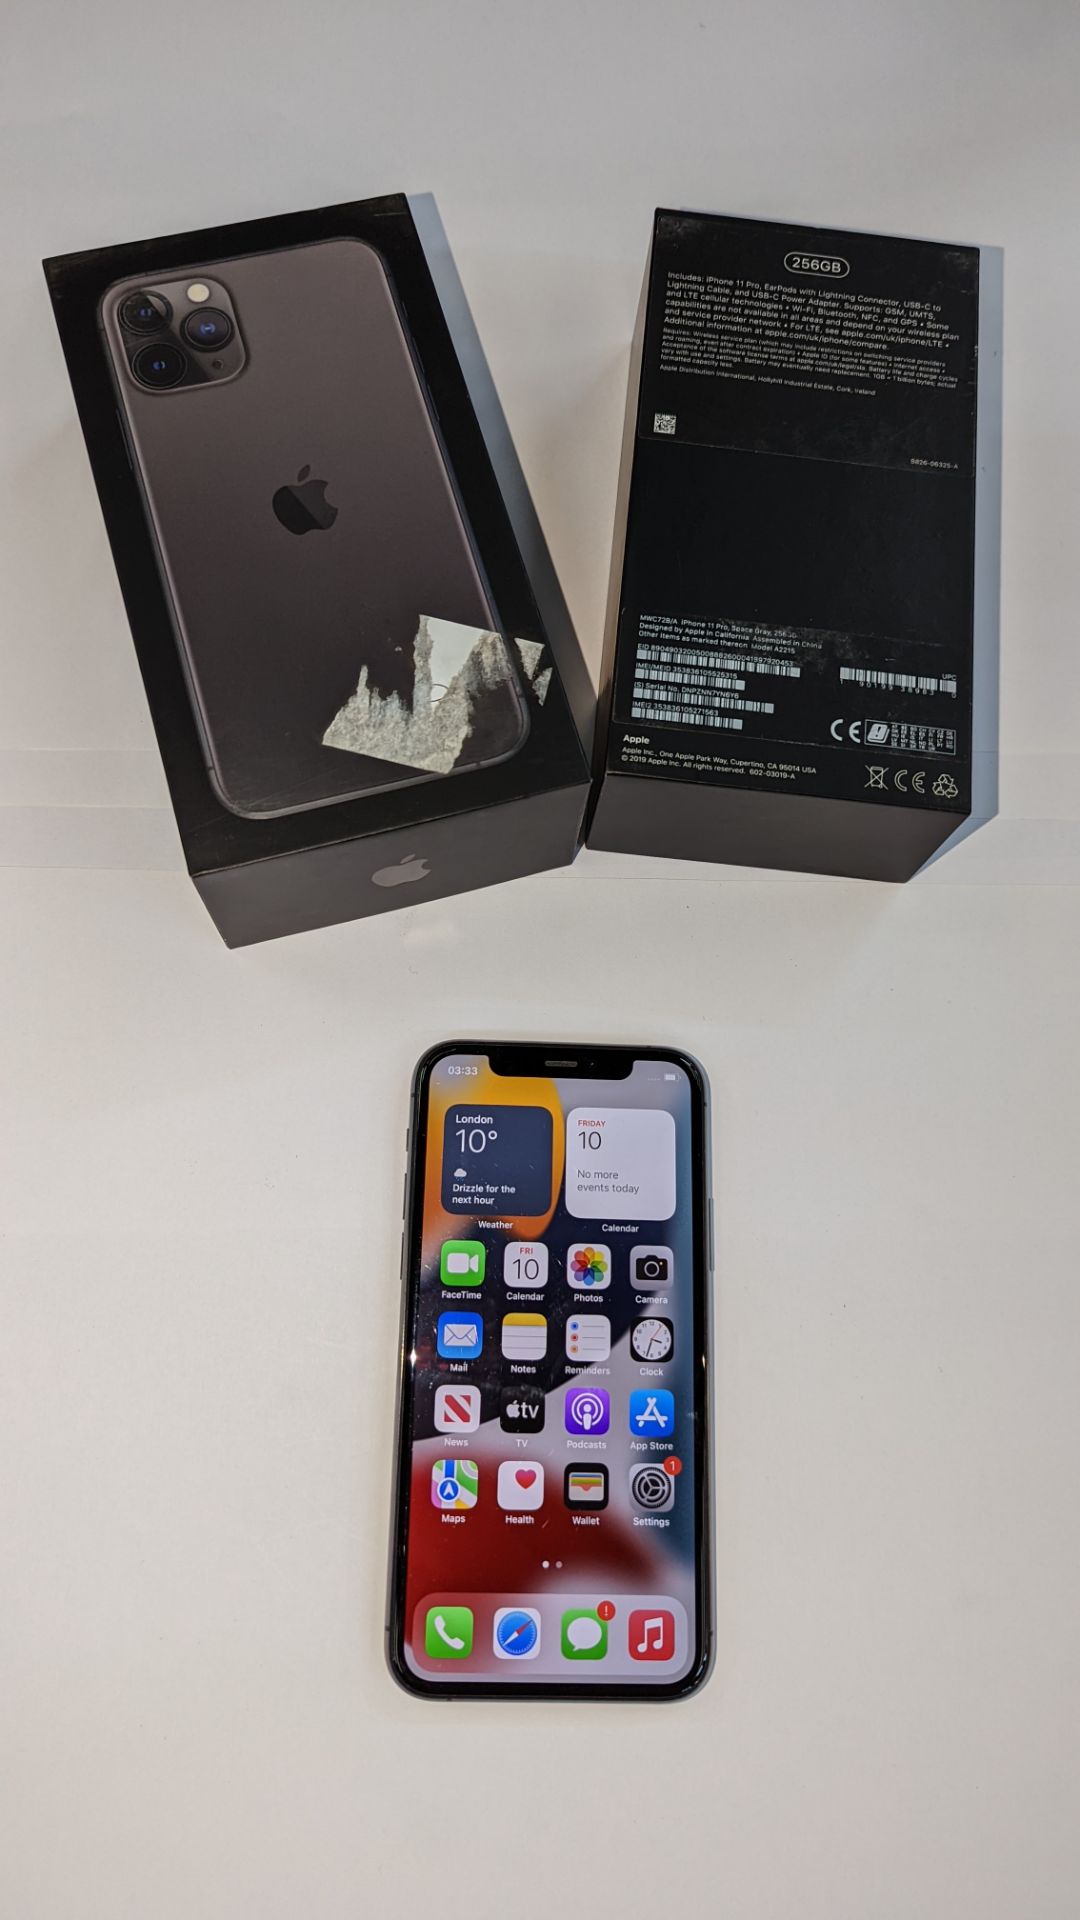 Apple iPhone 11 Pro, 256GB capacity, model A2215 (MWC72B/A). NB no charger or ancillaries. Include